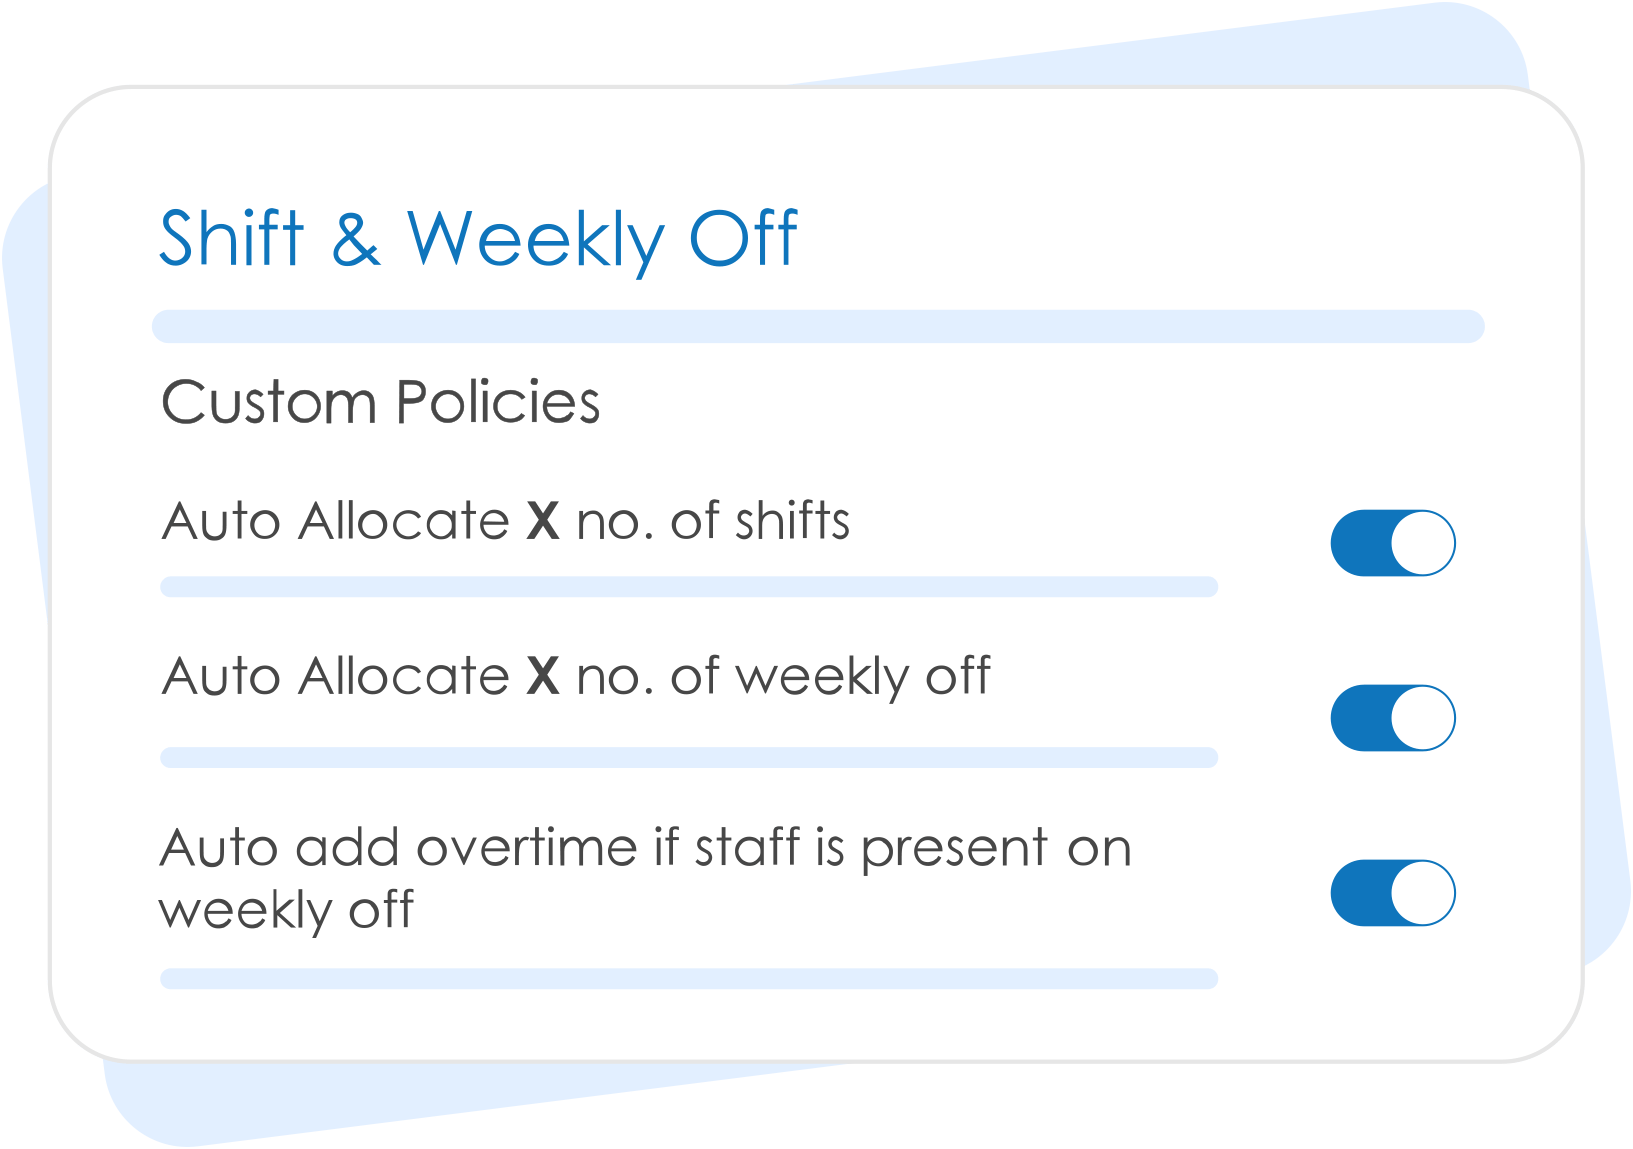 Set custom overtime policies for shift and weekly off